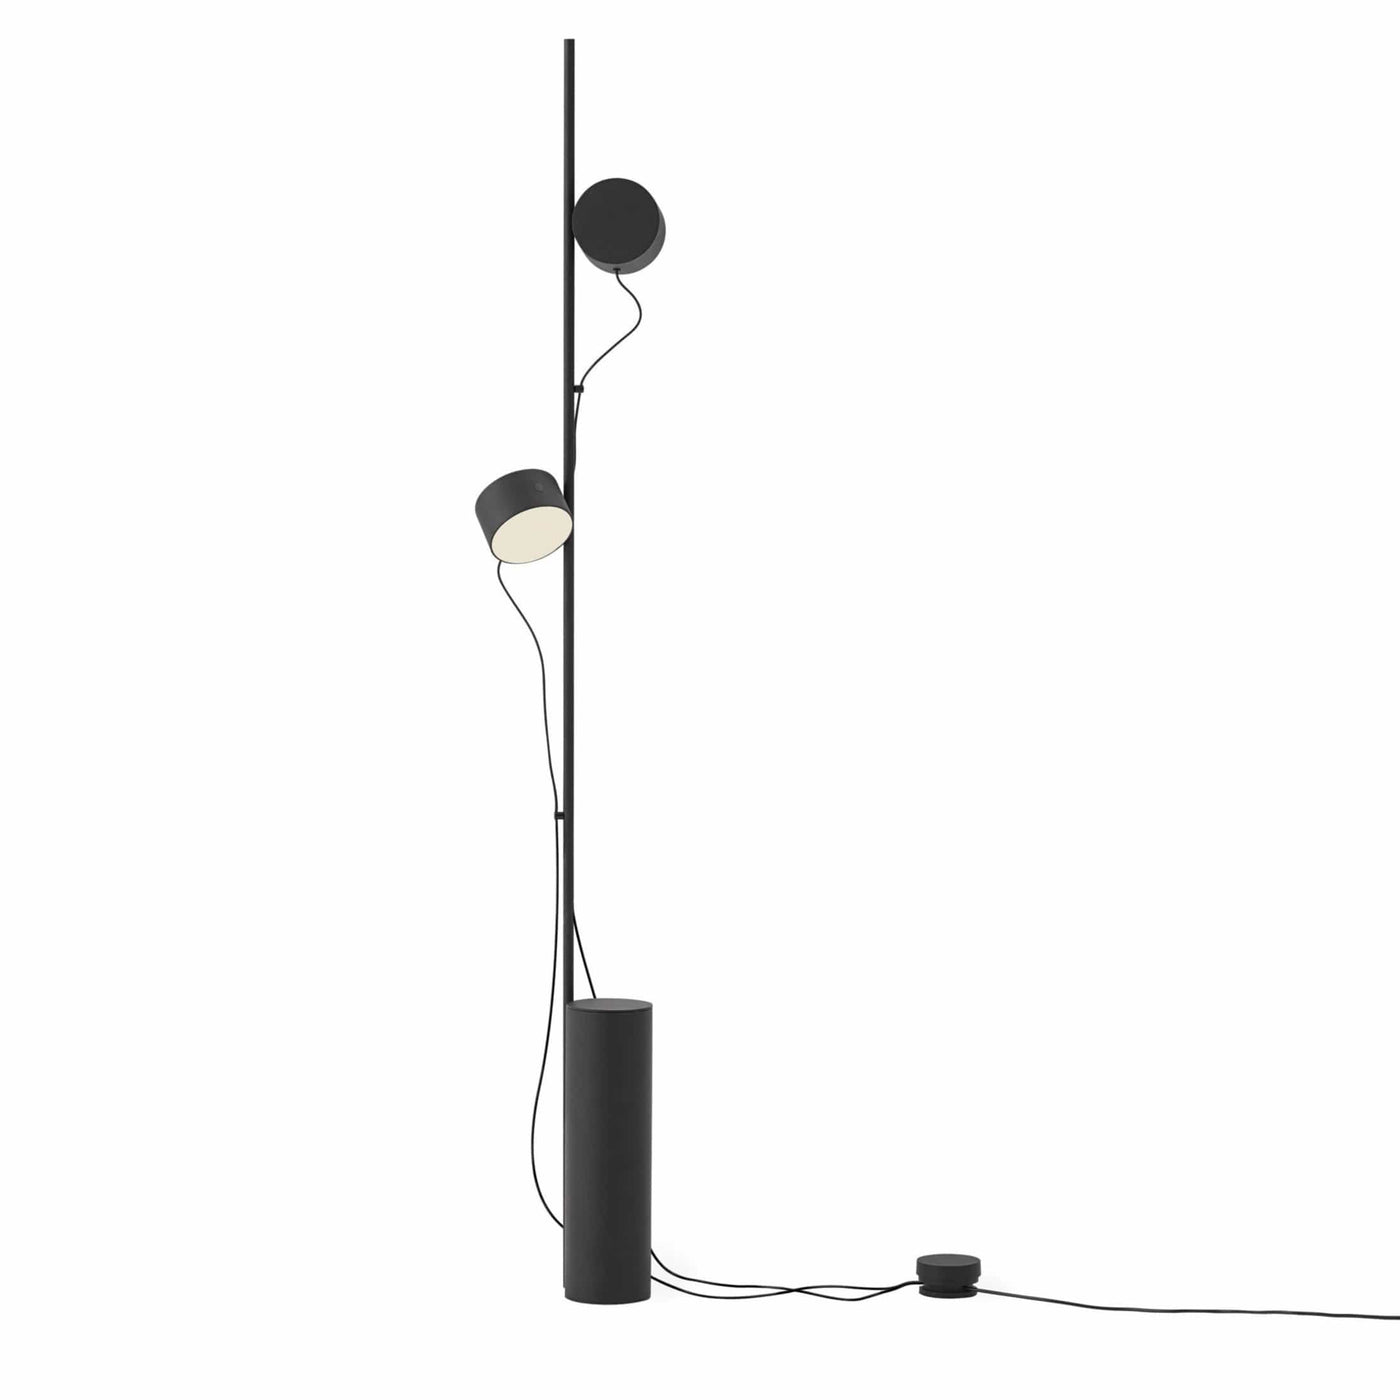 Muuto Post Floor Lamp in black, available from someday designs 